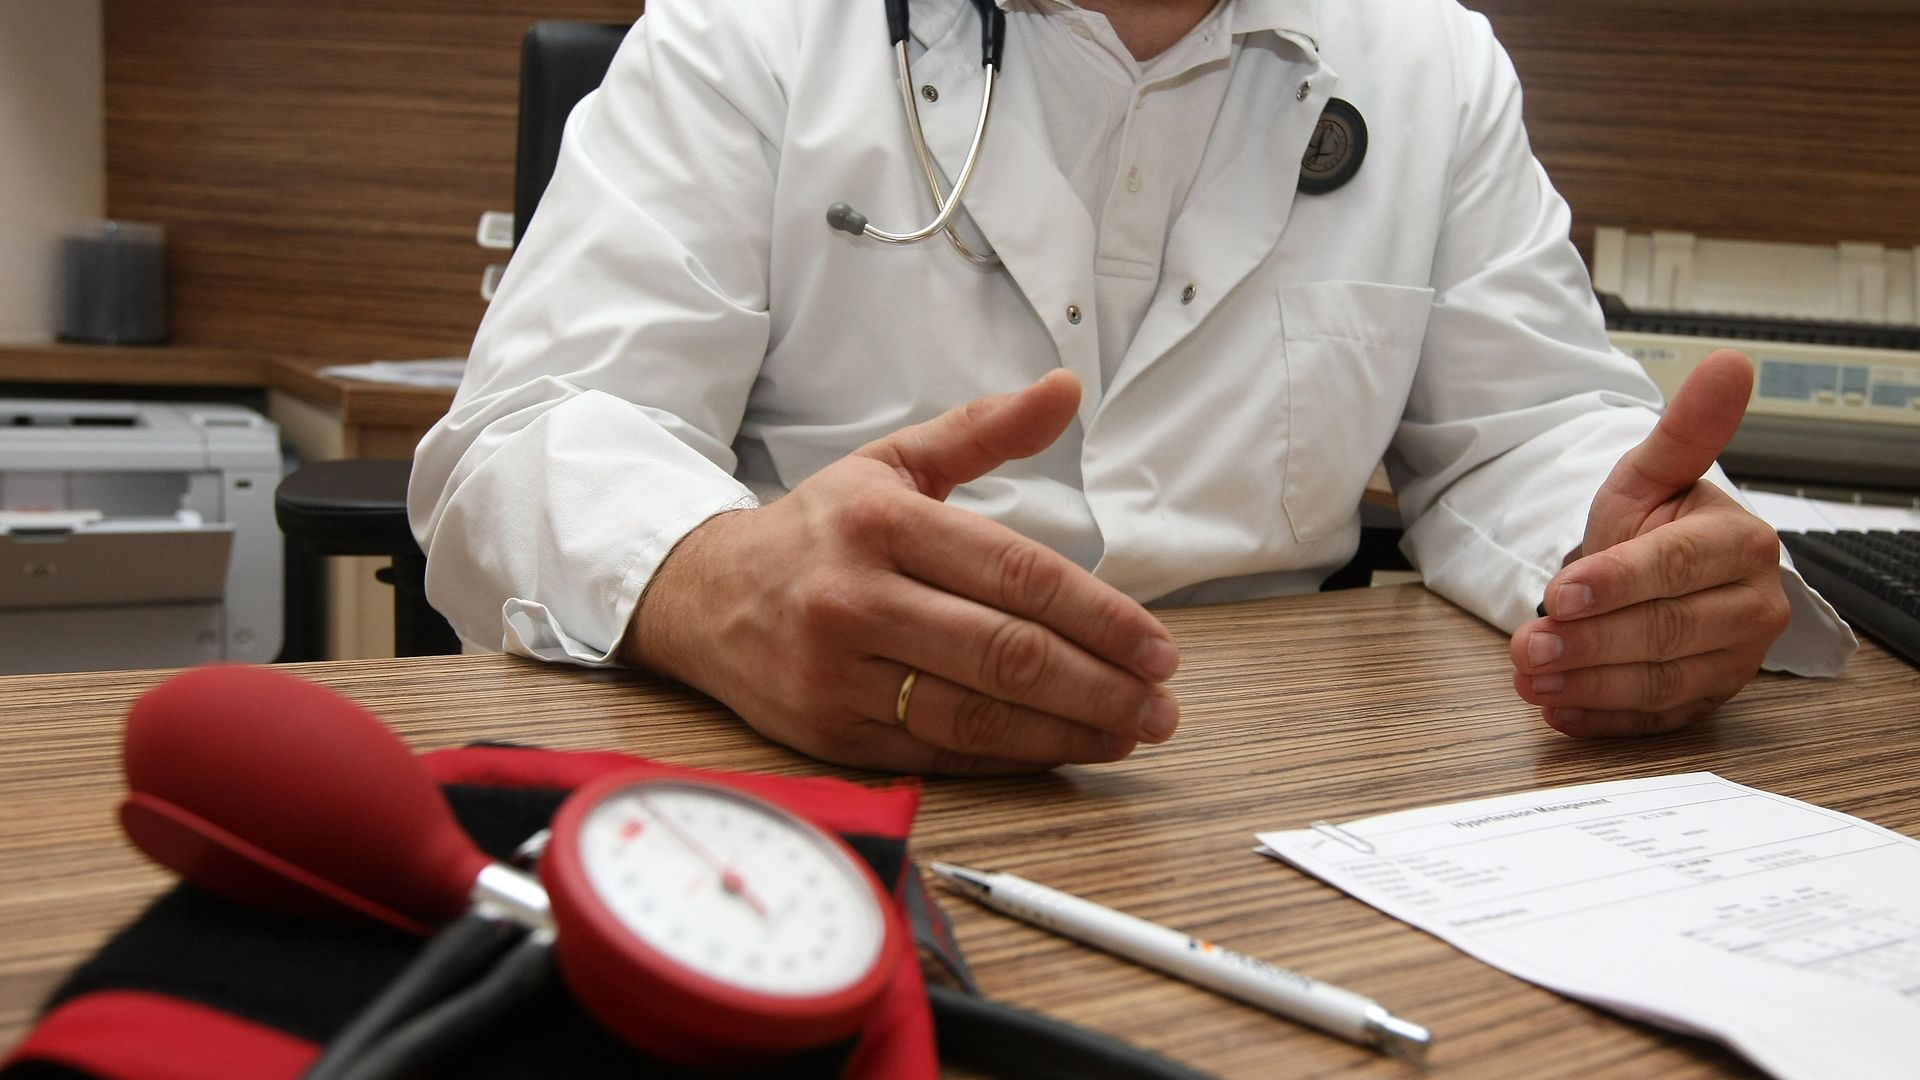 A doctor sits at a desk with paperwork and a blood pressure cuff.